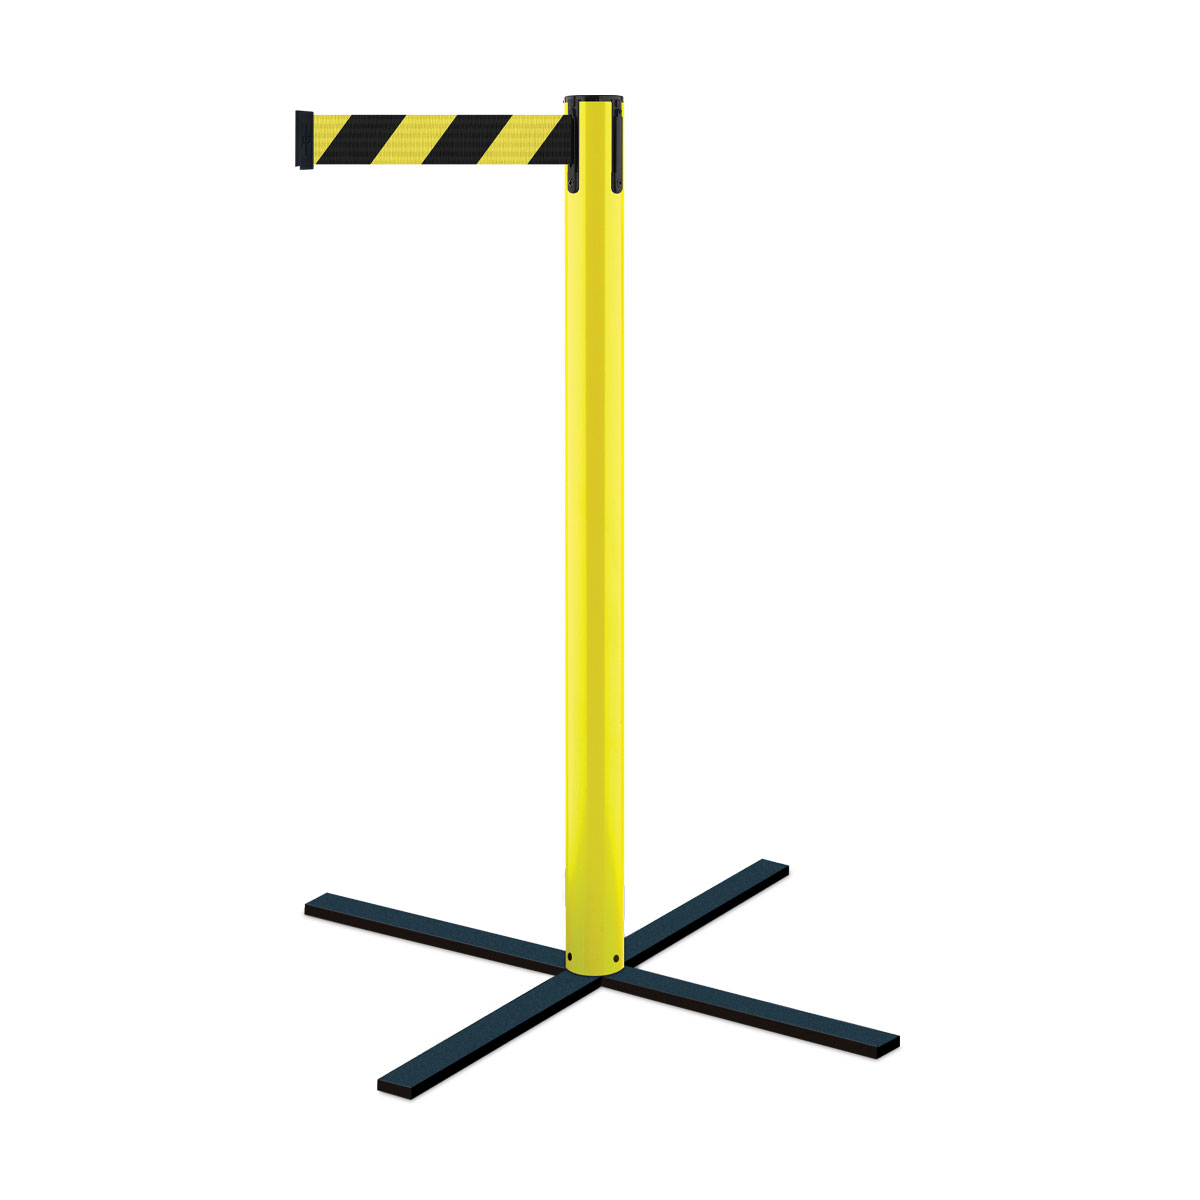 Tensabarrier® Stowaway Safety Barrier Single Post (Bag Not Included)- Designed to Be Highly Portable & Quick to Deploy an Instant Safety Barrier